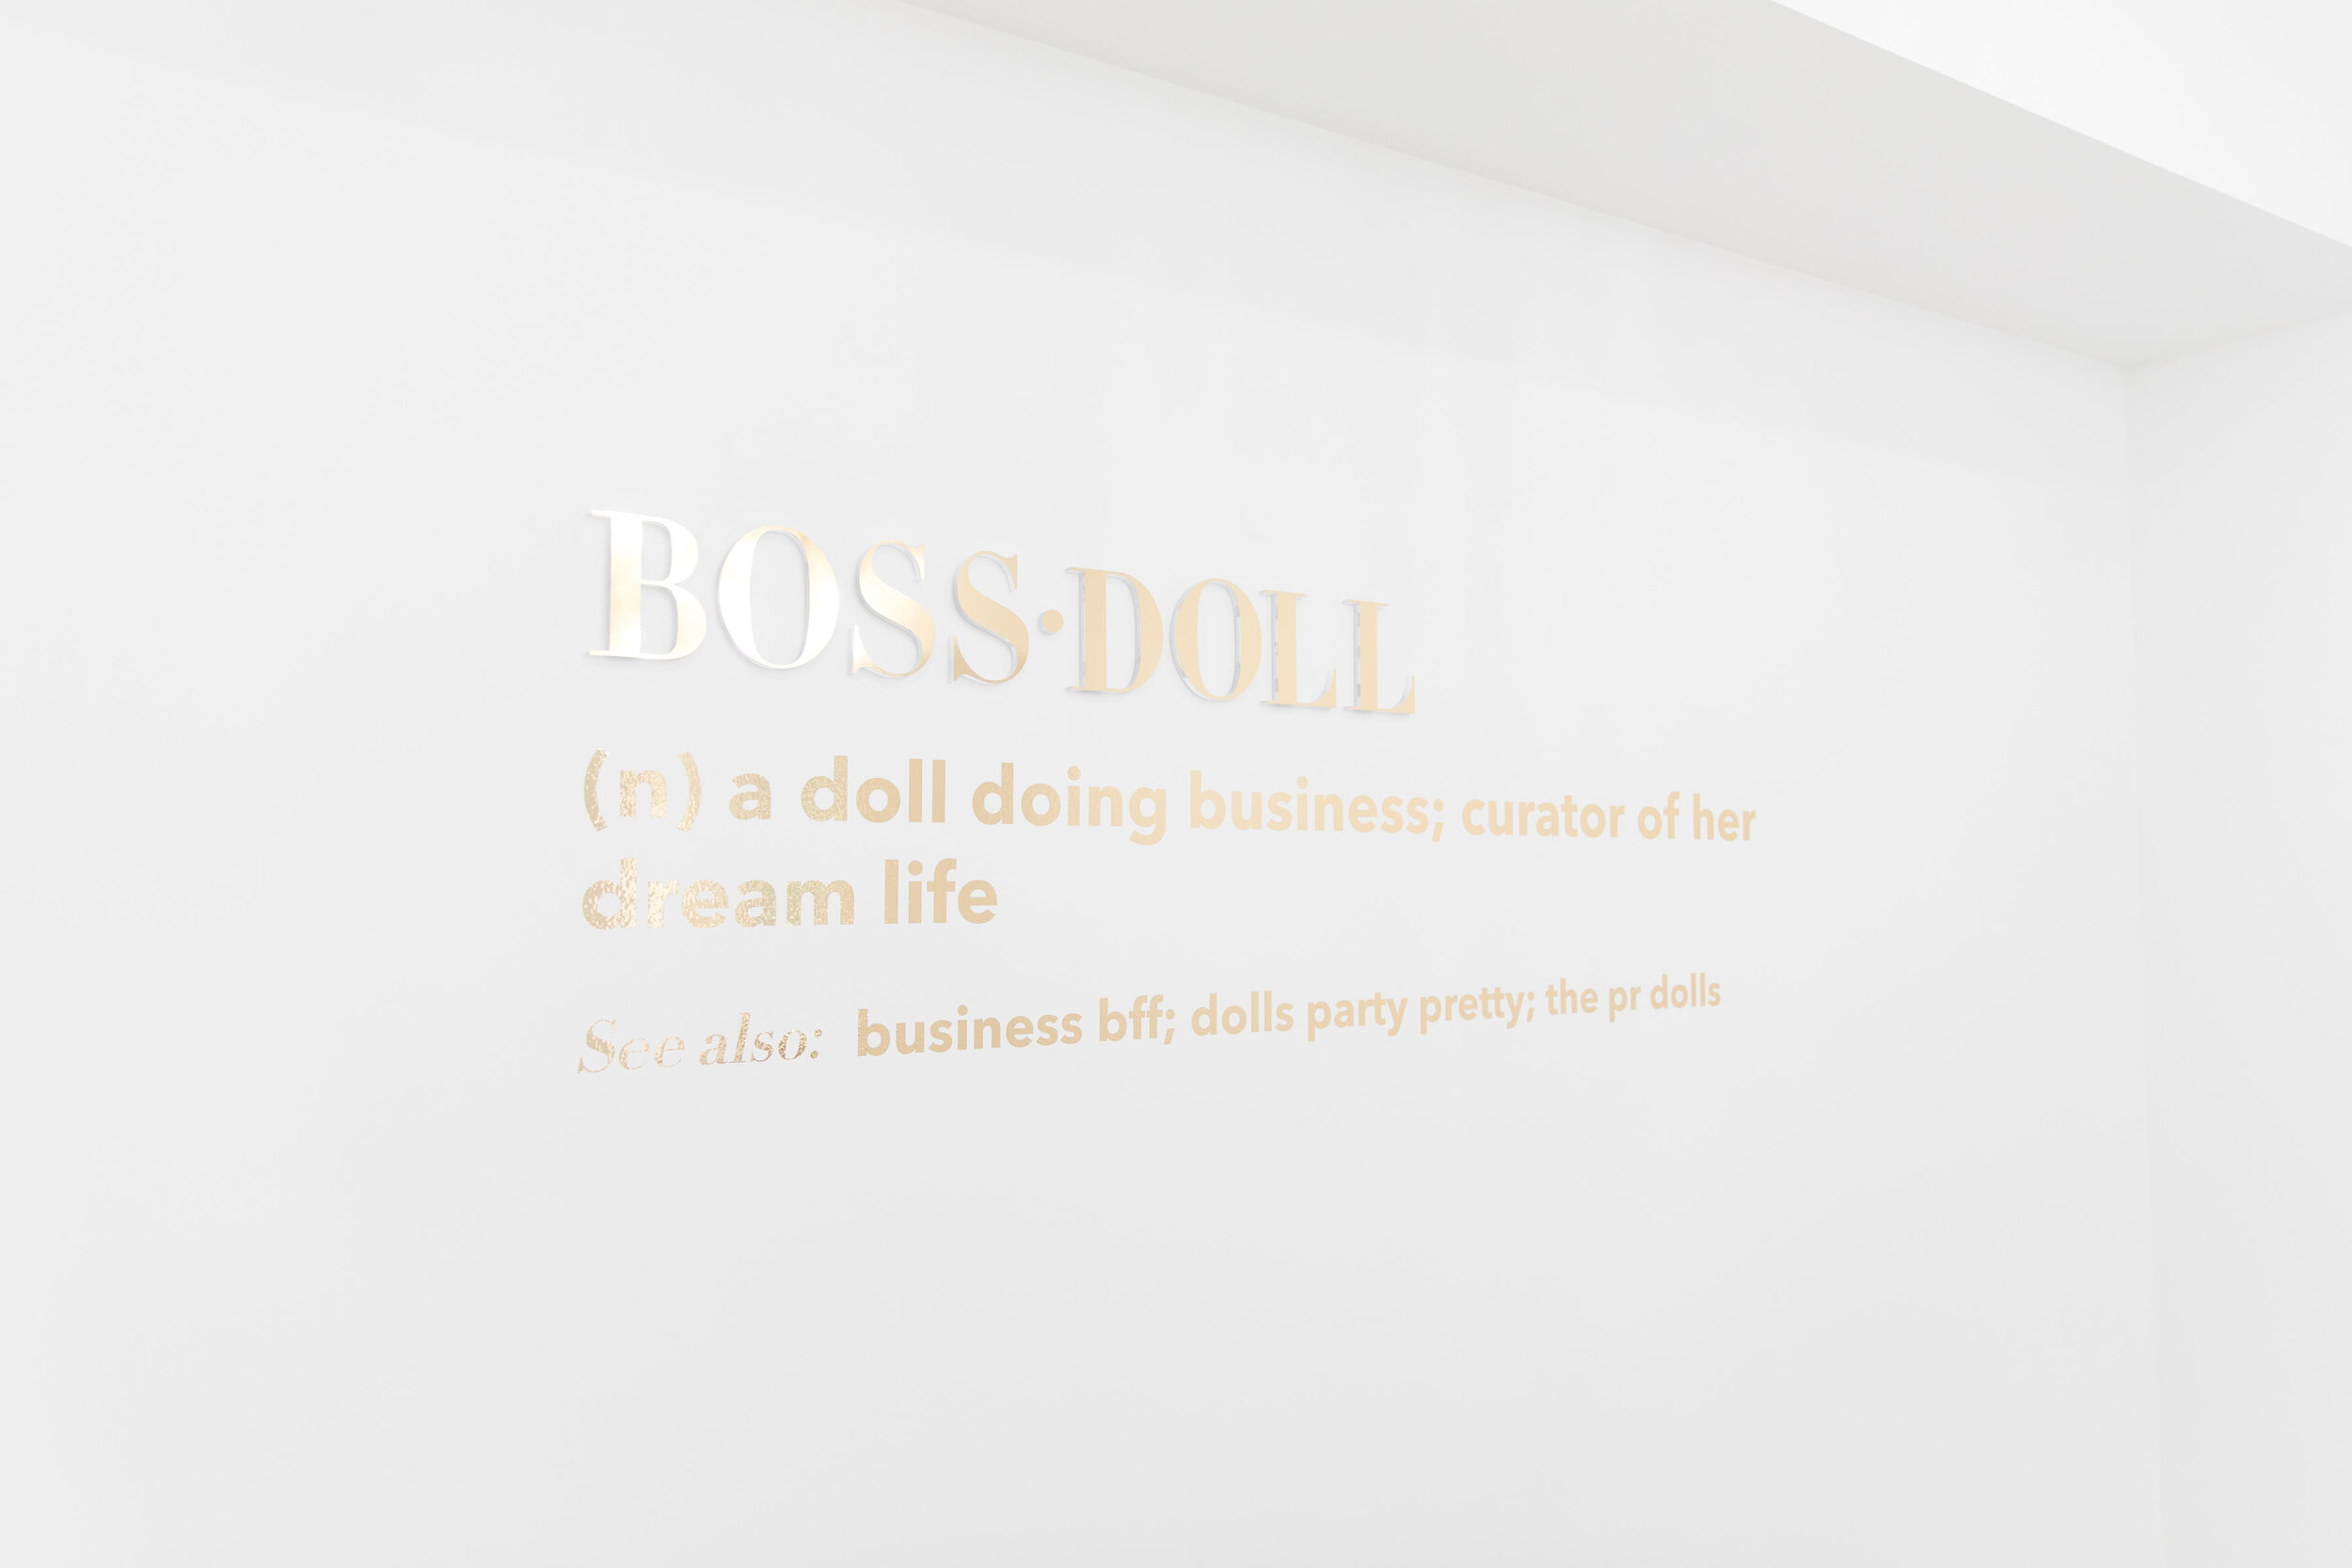 POSH-PR-The-Caroline-Doll-Barbie-Office-Pink-Style-Boss-Goals-At-Home-Workspace-Luxury-Fashion-Infused-Office-The-Doll-HQ-Chic-Conference-Room-Boss-Doll-2.jpg